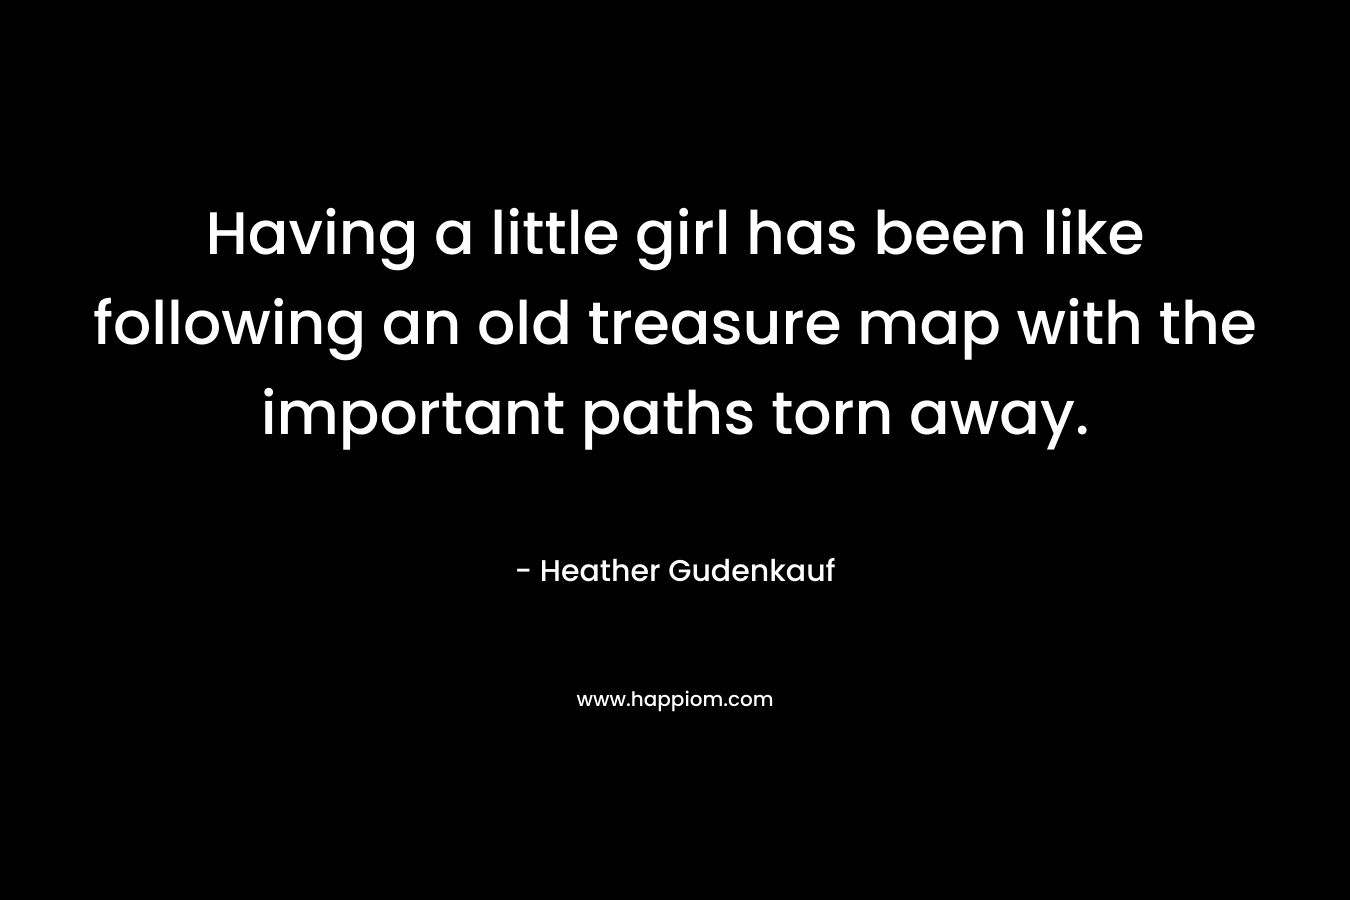 Having a little girl has been like following an old treasure map with the important paths torn away. – Heather Gudenkauf